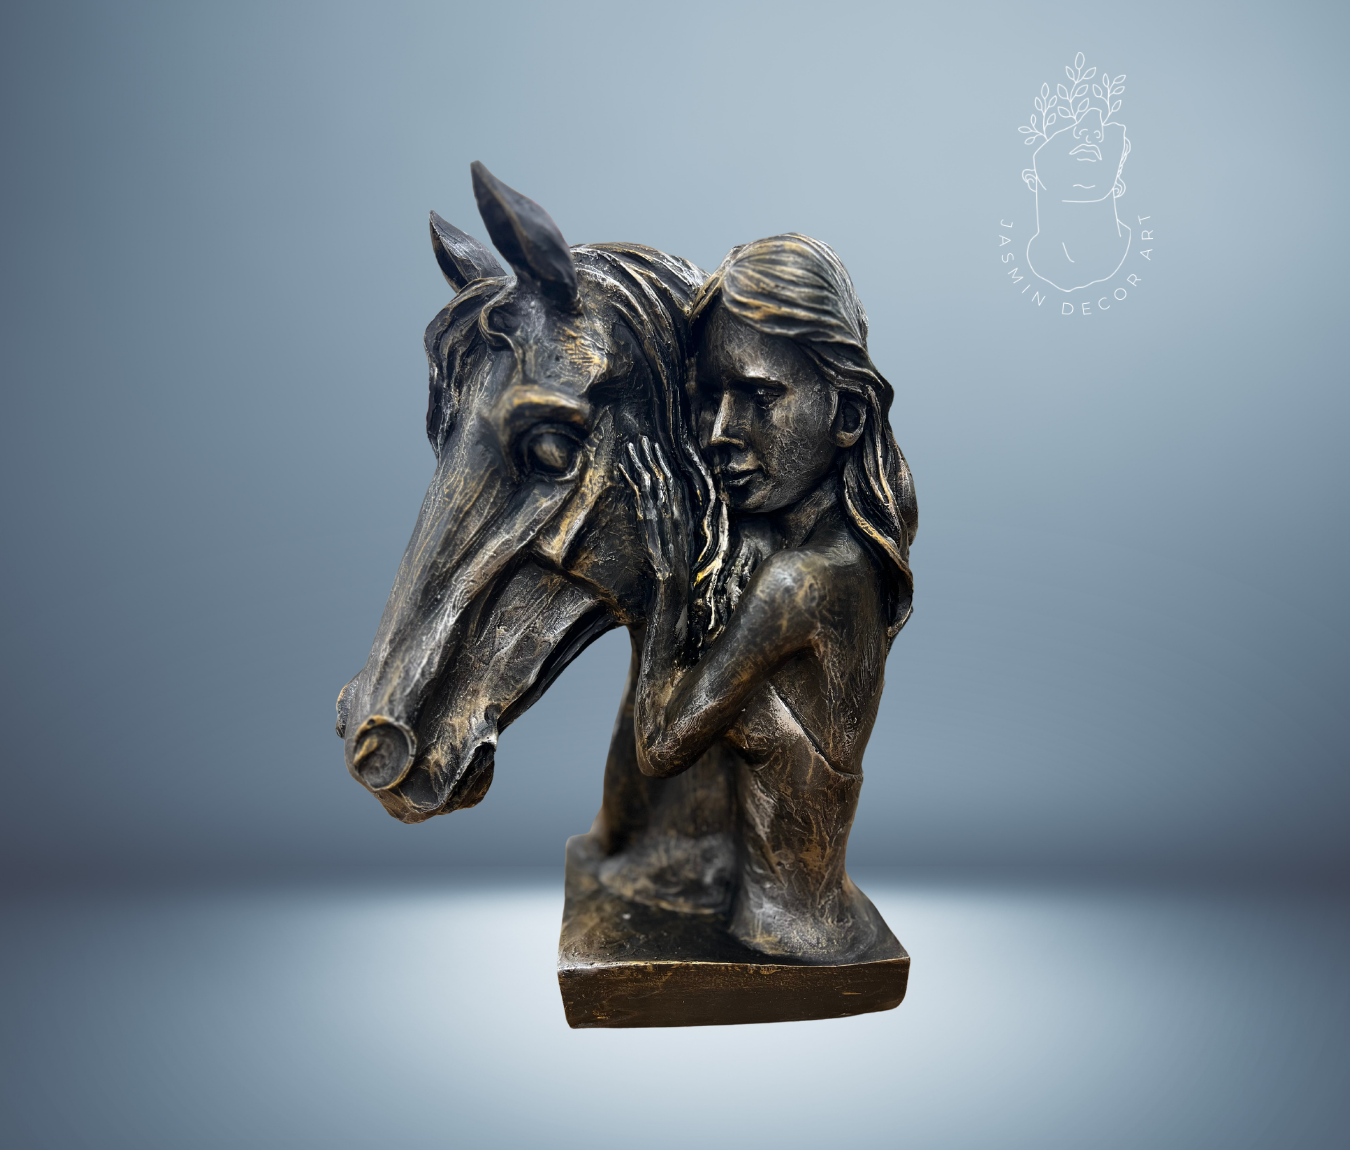 Decorative horse and woman statue symbolizing equestrian spirit, available in Black/Gold or Black/Silver colors.